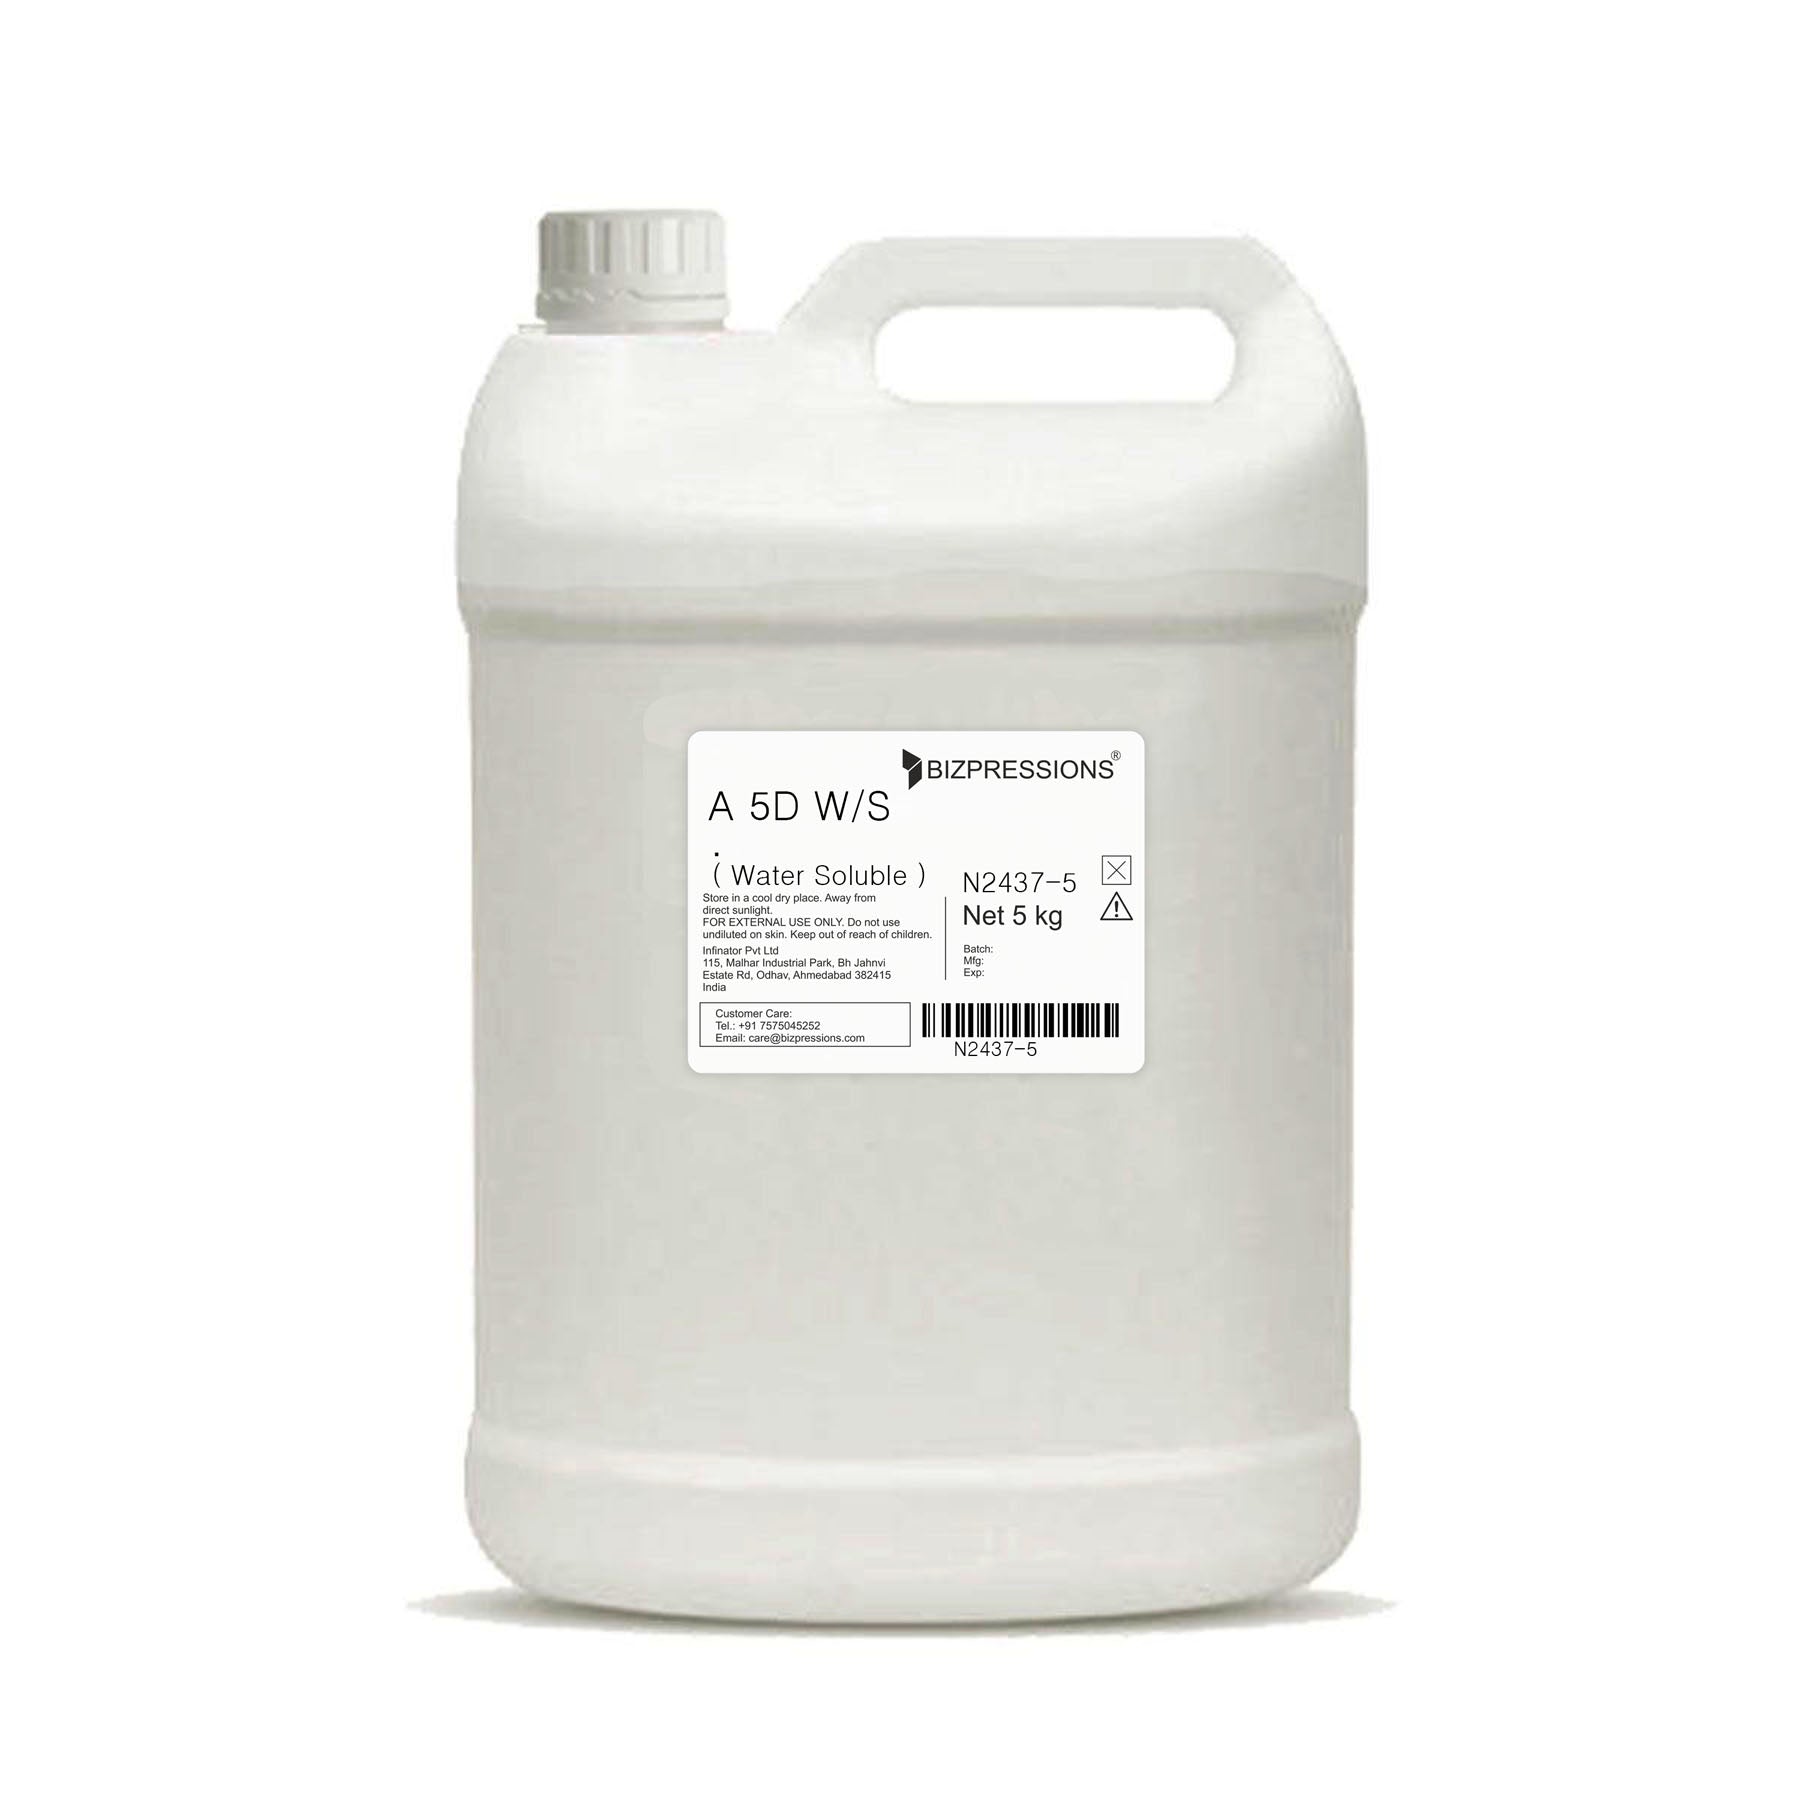 A5D W/S - Fragrance ( Water Soluble ) - 5 kg